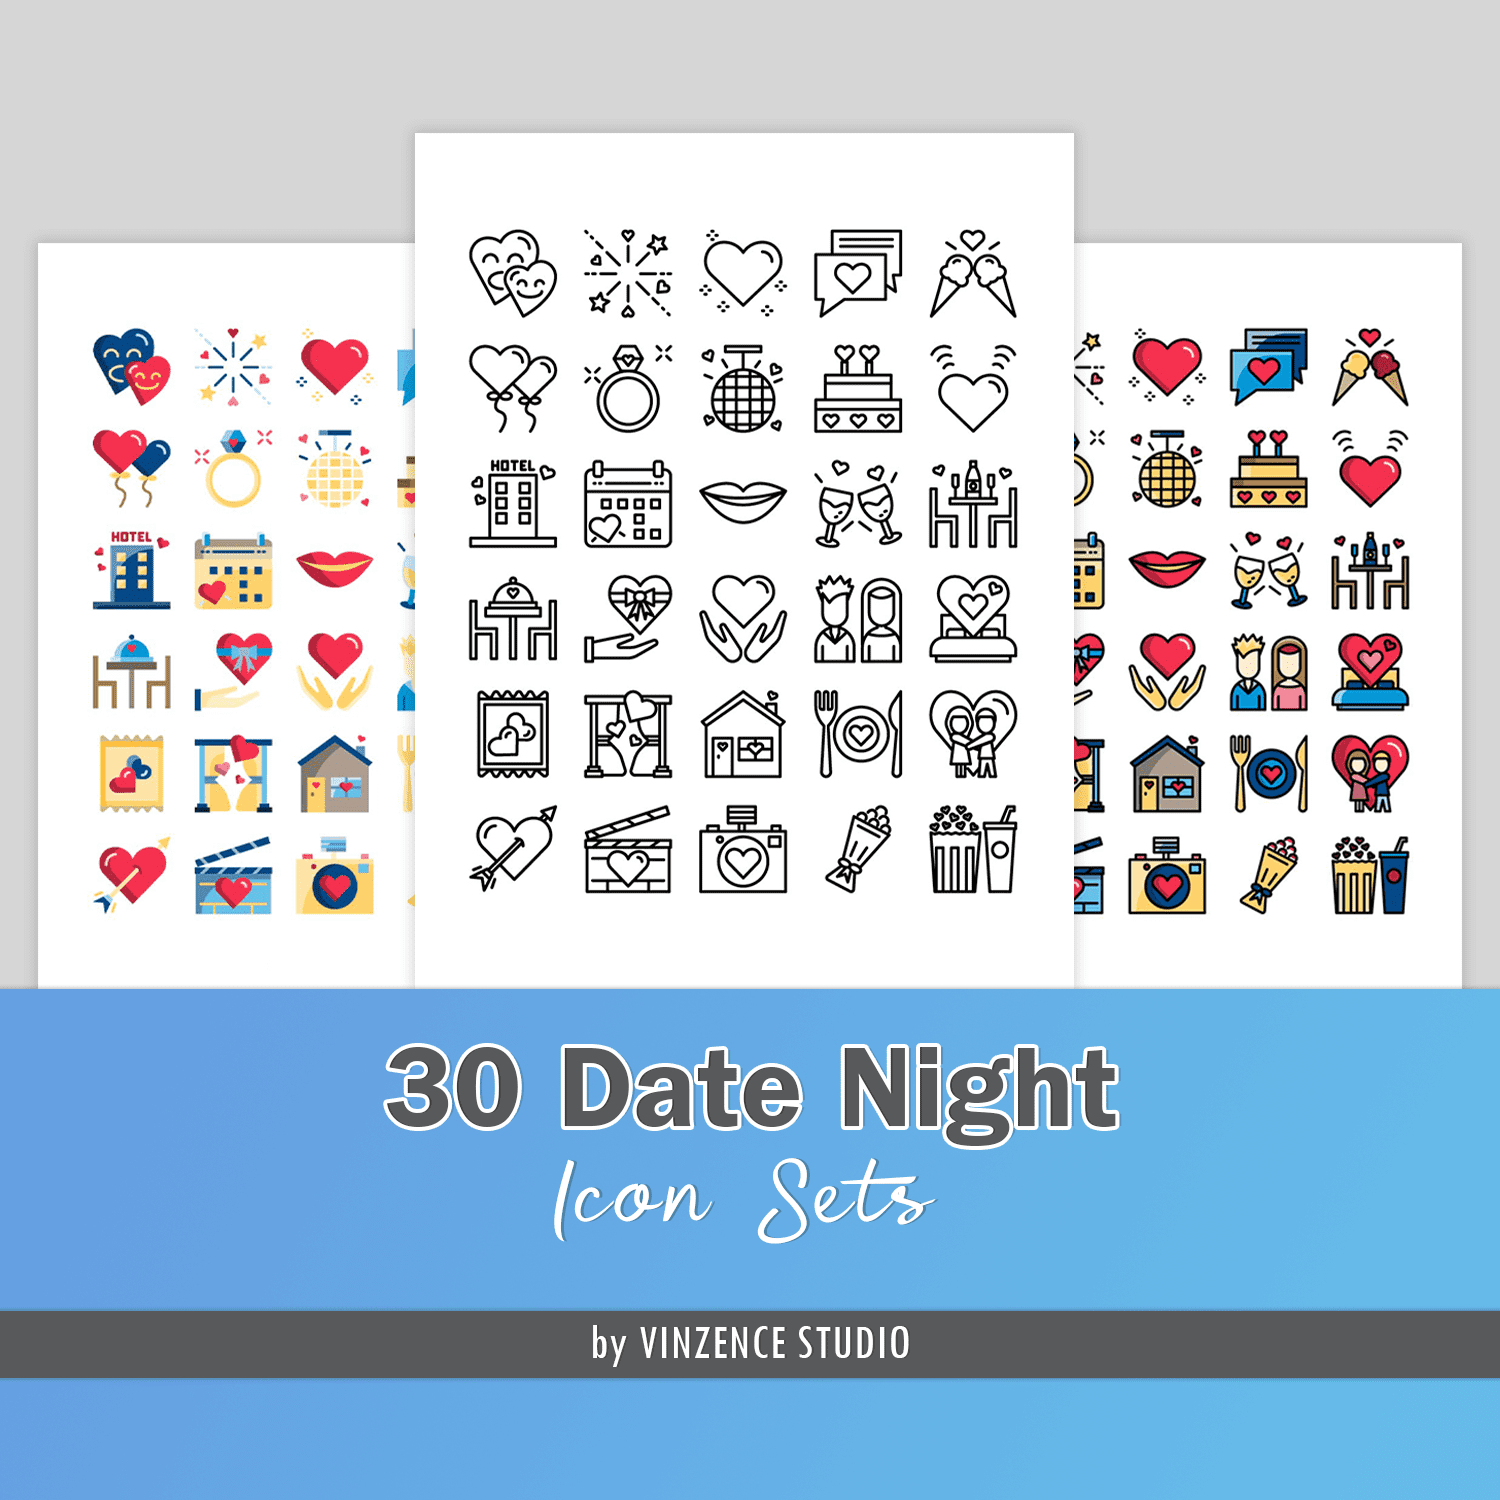 30 Date Night Icon Sets.